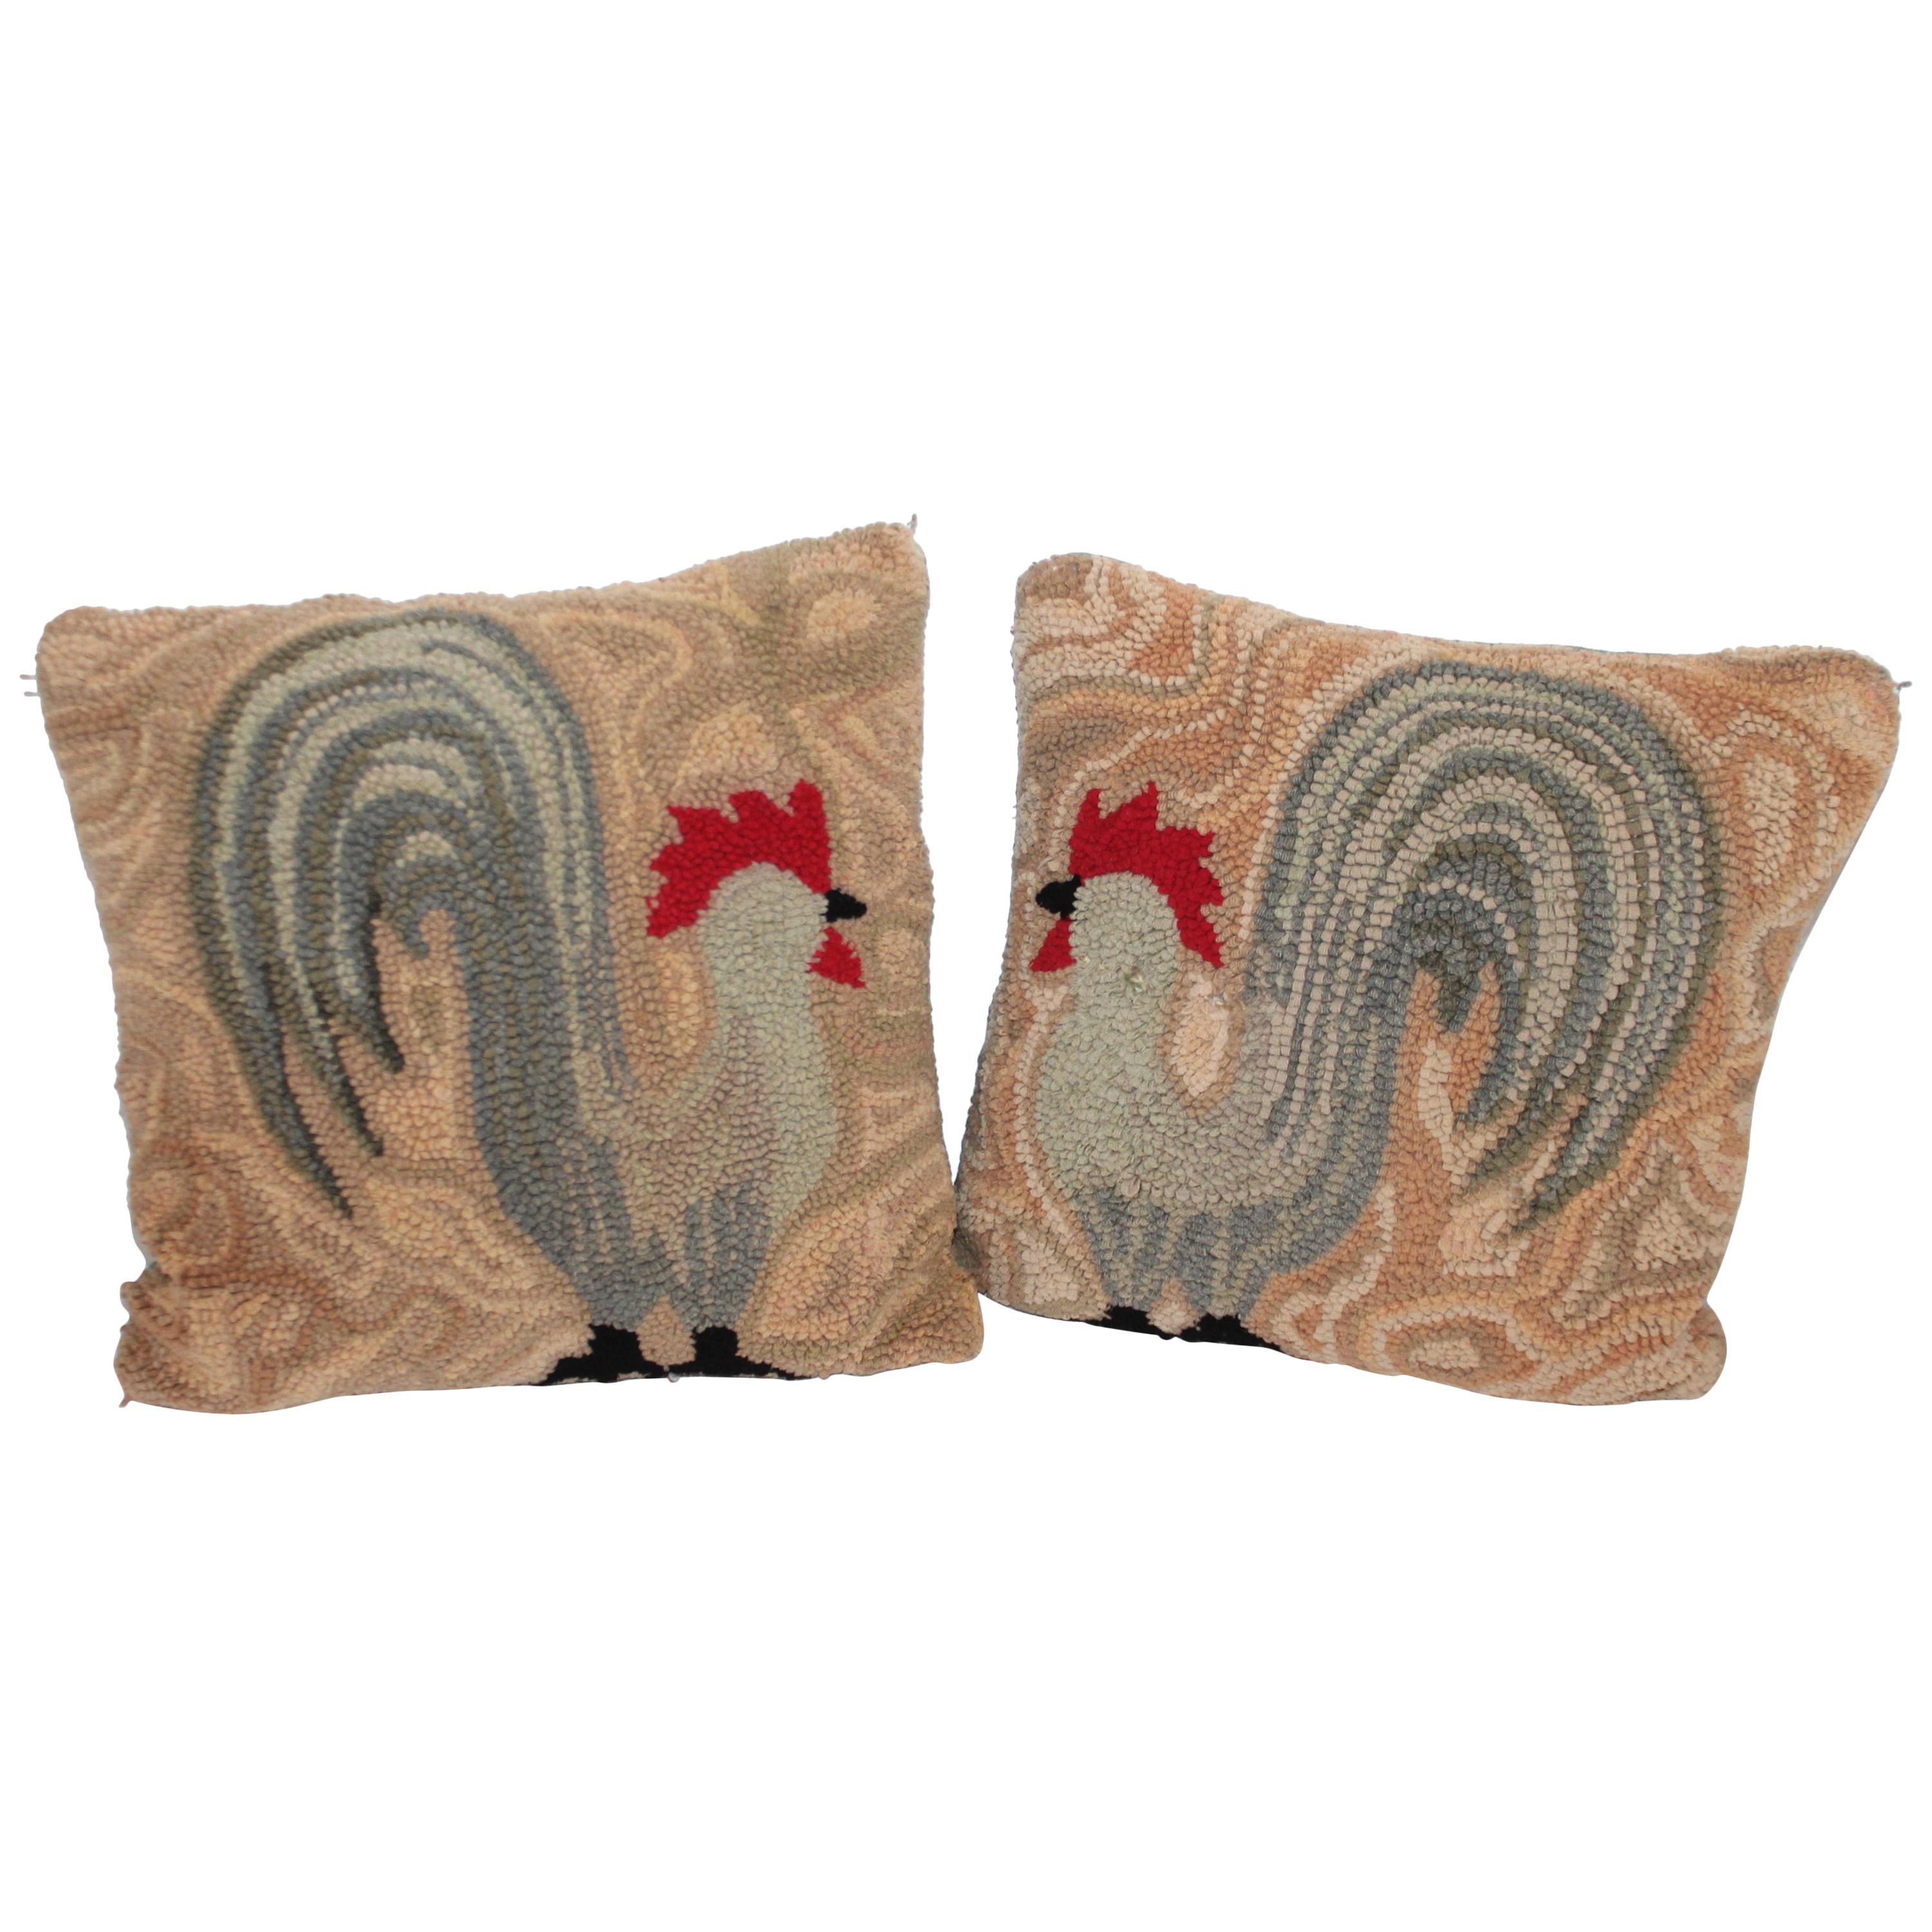 Early American Hooked Rug of Roosters Pillows, Pair